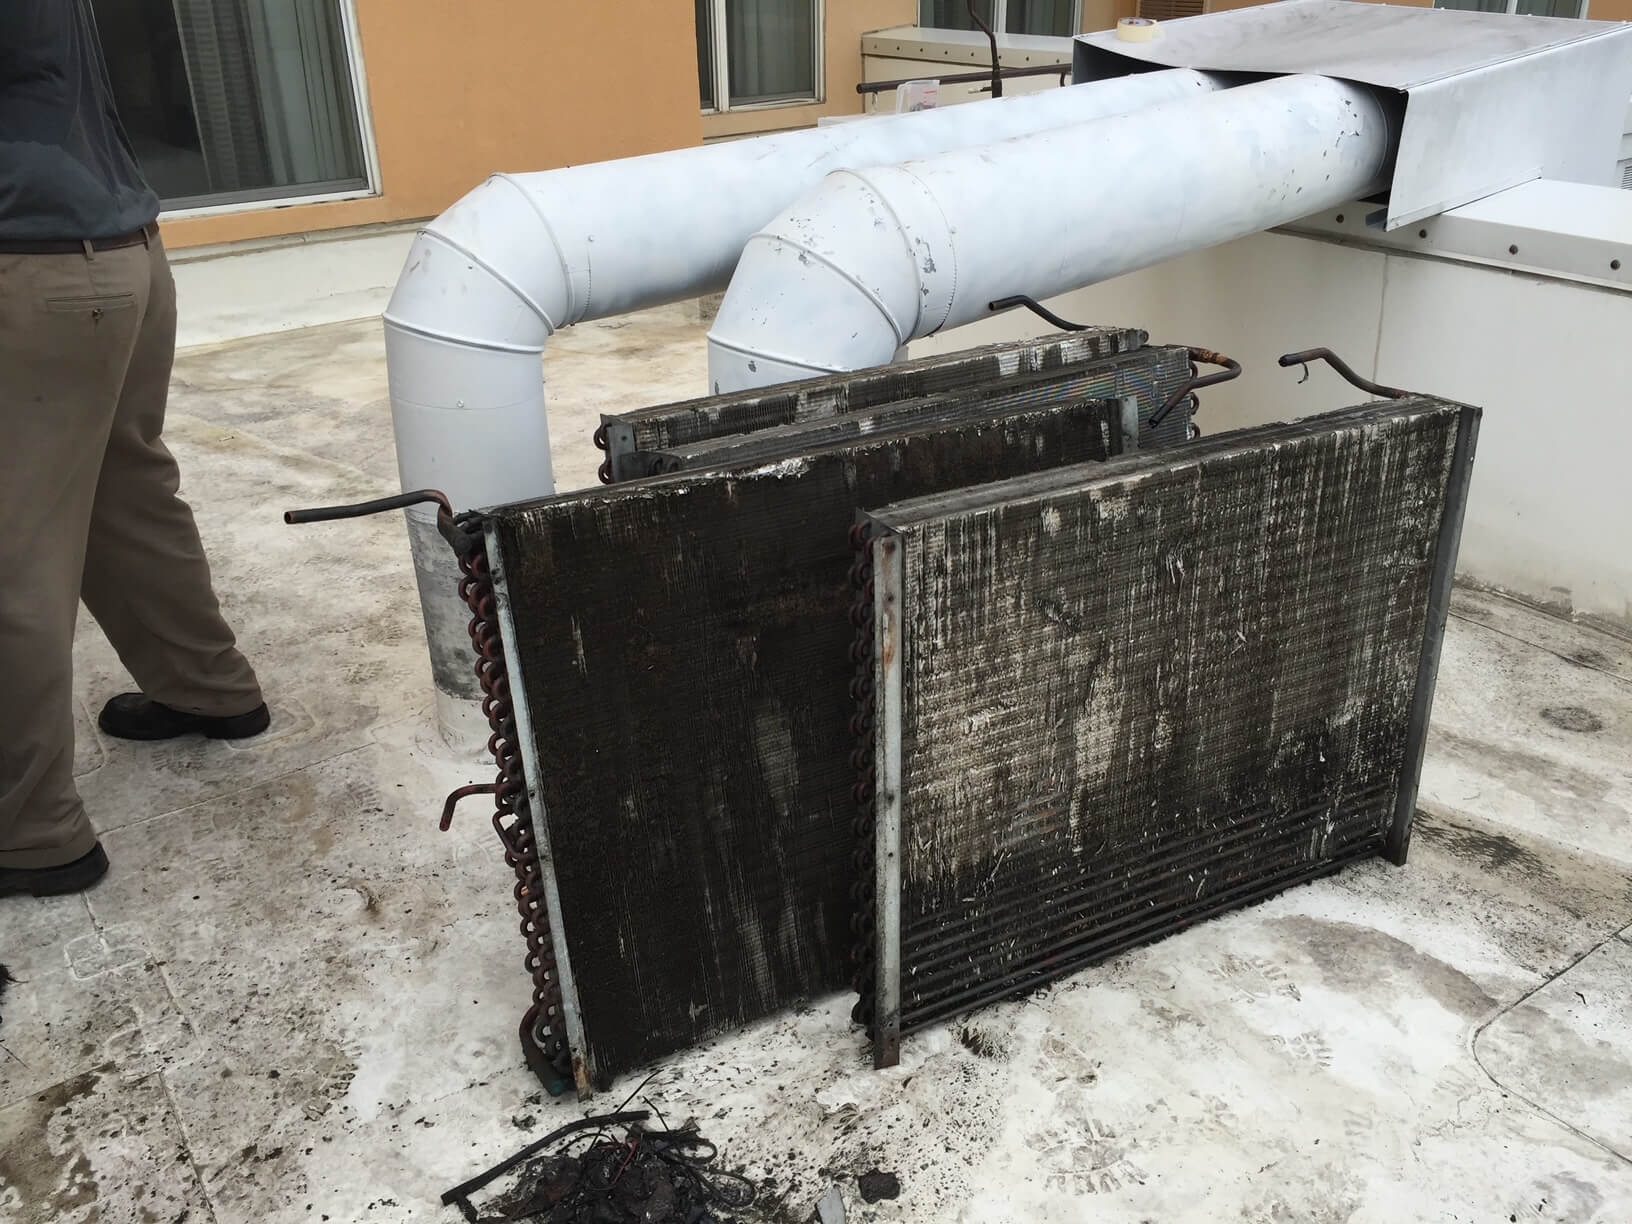 Commercial Refrigeration repair  in Palm Bay FL.